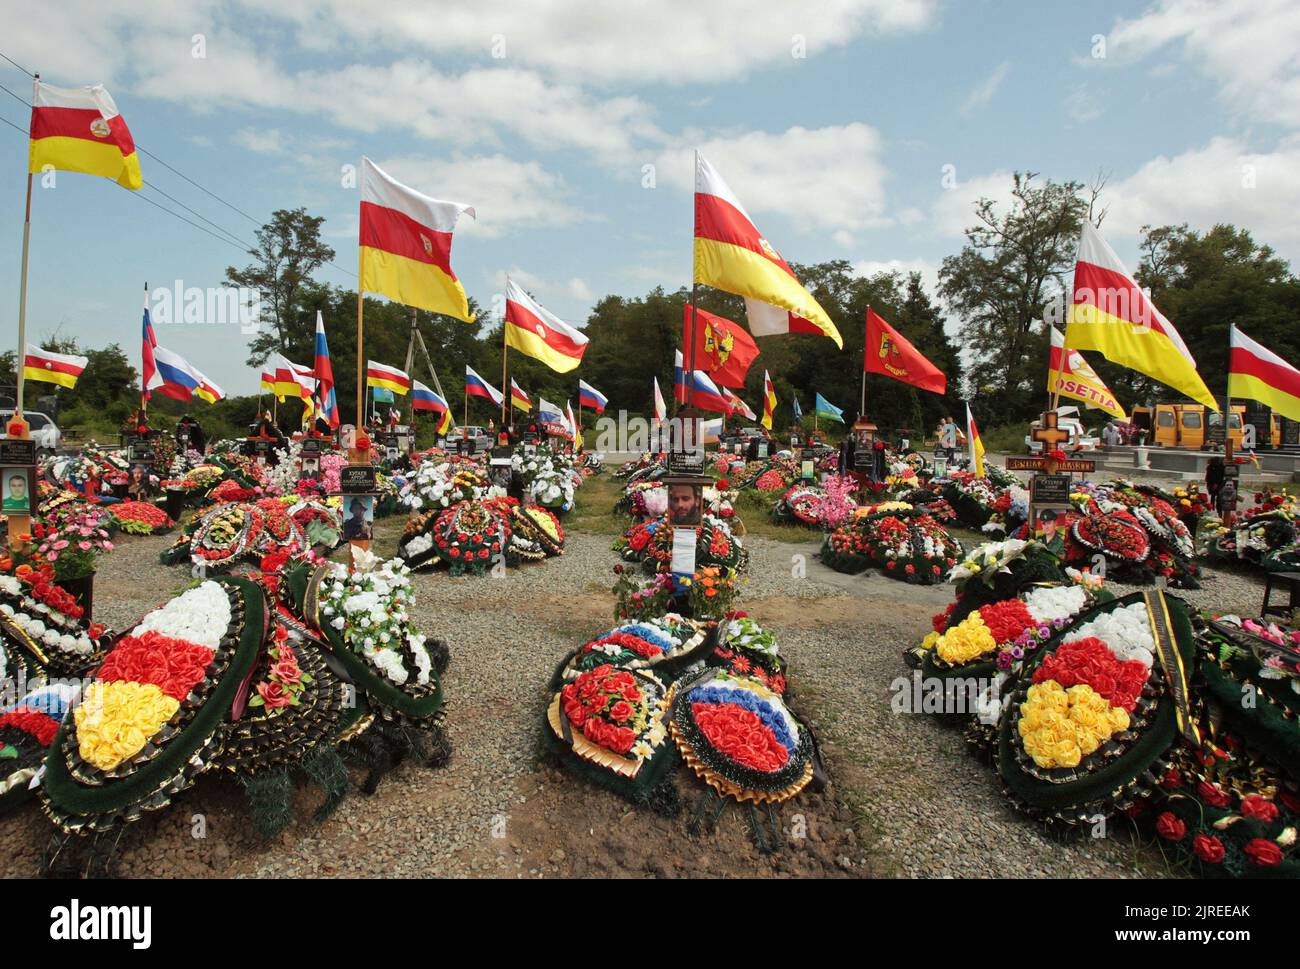 A view shows graves of Russian service members, including those killed during a military conflict in Ukraine, at a cemetery in Vladikavkaz, Russia August 22, 2022. REUTERS/REUTERS PHOTOGRAPHER Stock Photo